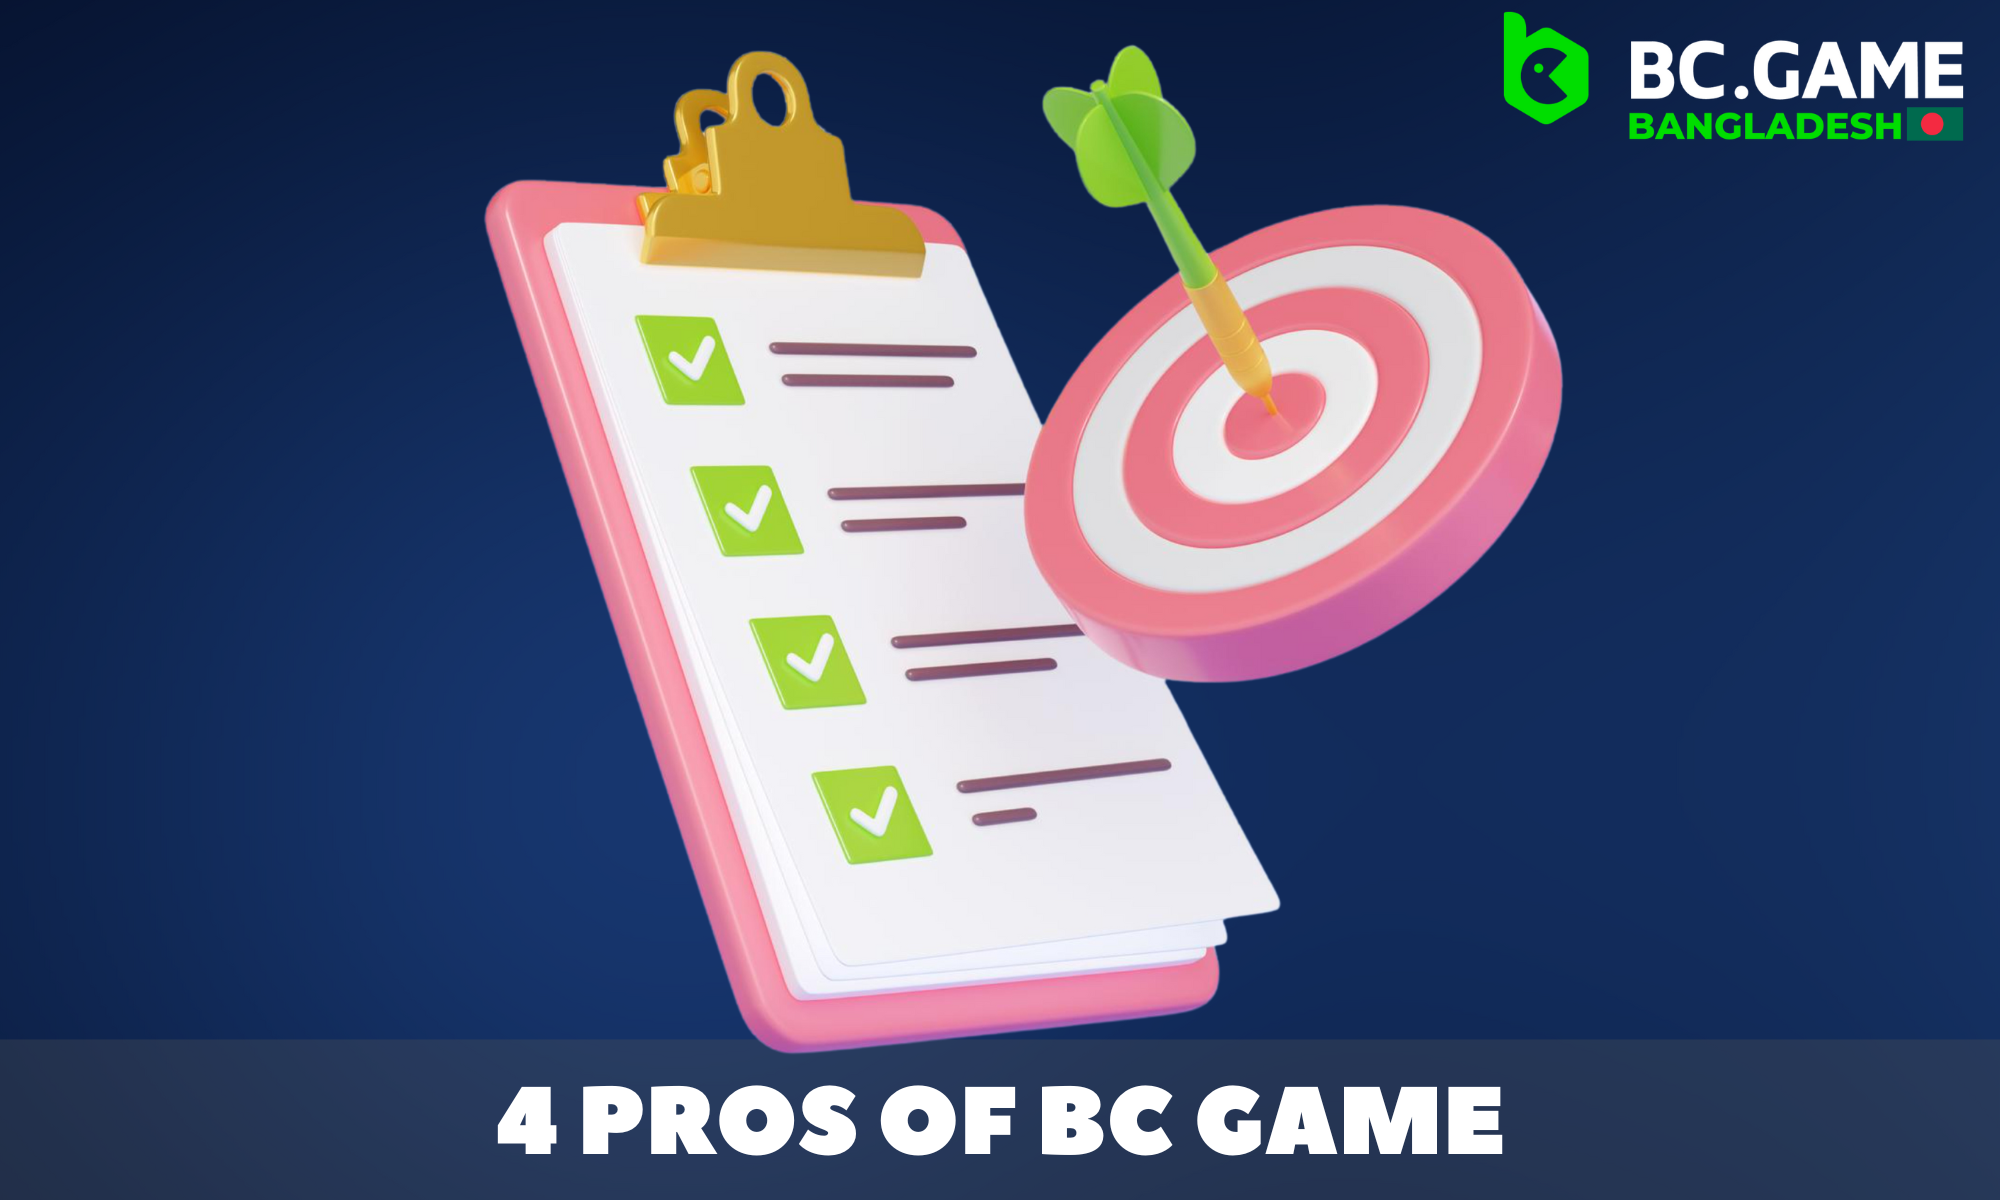 Overview of 4 advantages of BC.Game over other casinos